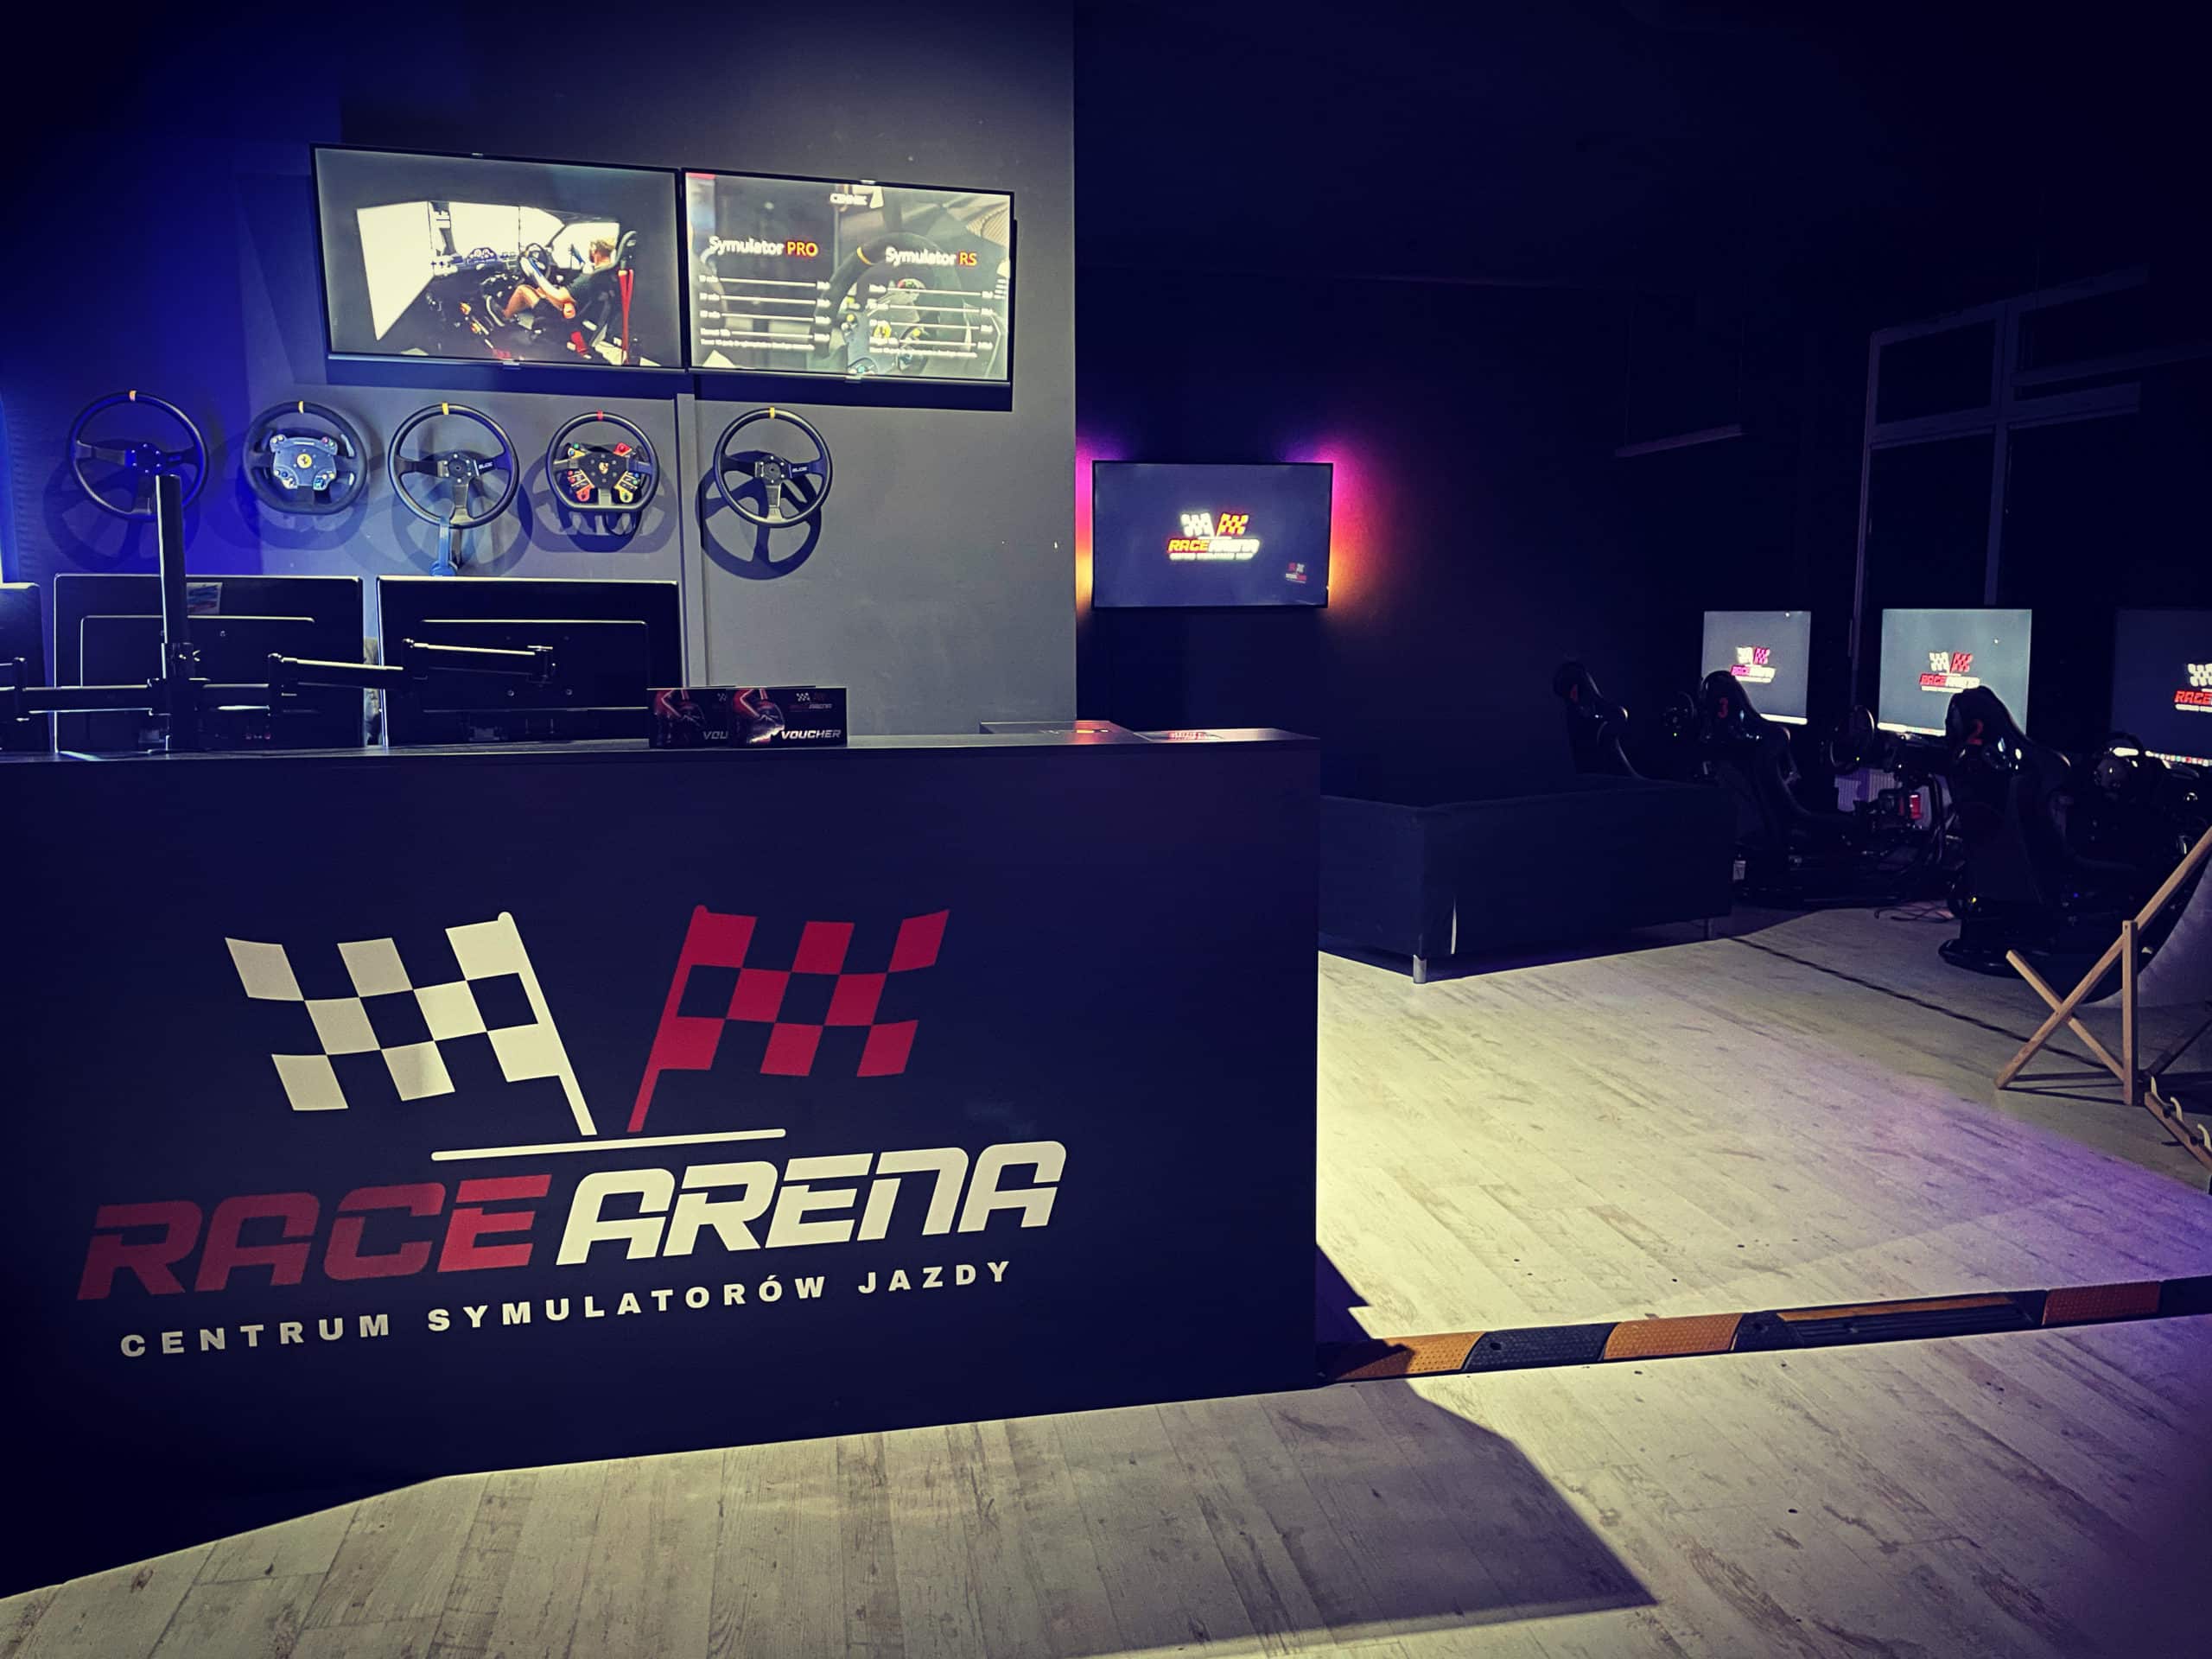 Race Arena Poland is the official OEM partner of Simucube, incorporating Simucube 2 Direct Drive force feedback wheelbases, such as Simucube 2 Sport, Pro and Ultimate wheebases, in their sim racing builds for sim racers.